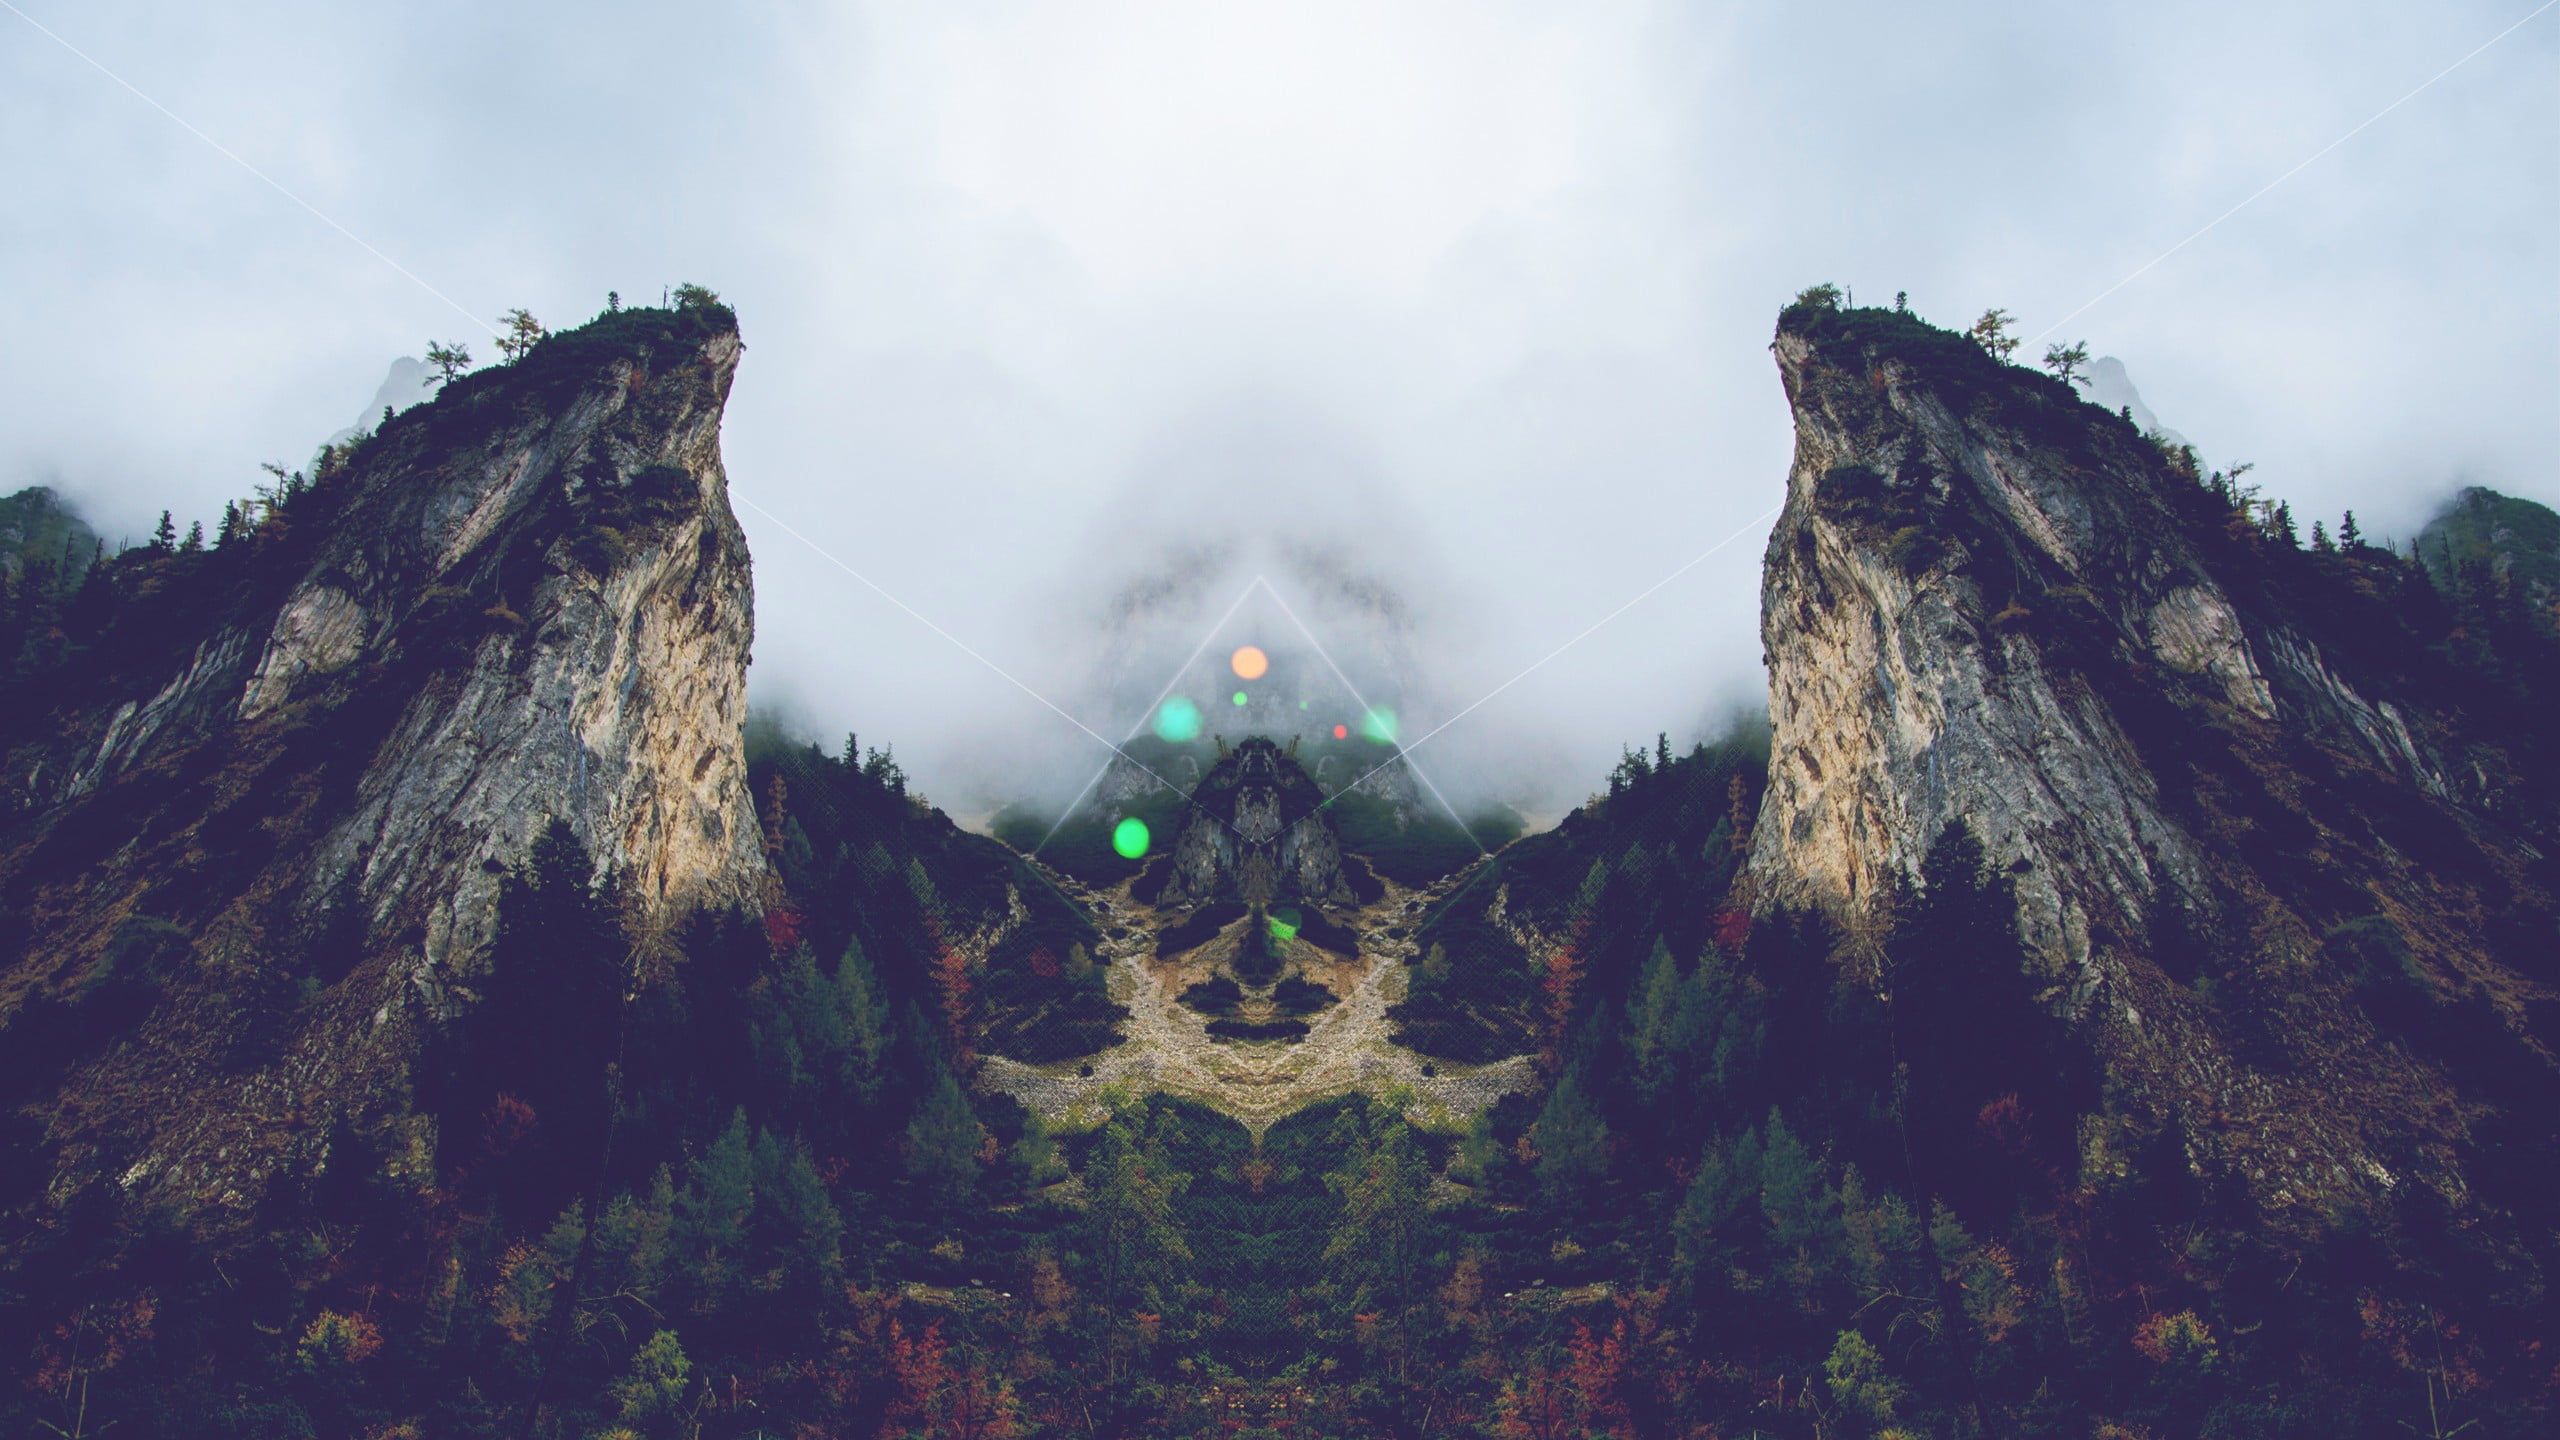 mountains and trees, forest, mirrored, prism, sky, scenics - nature